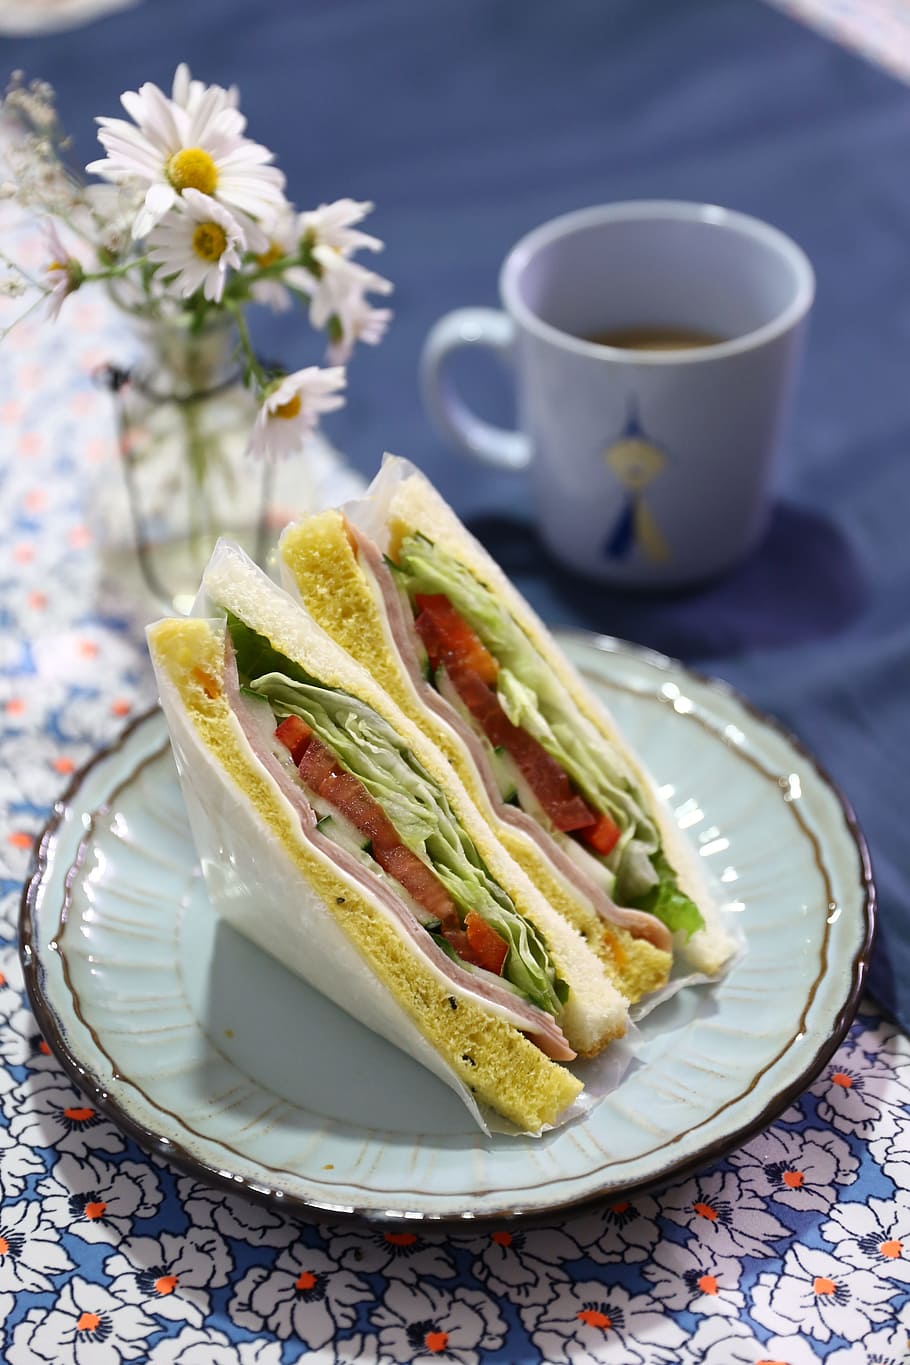 two, vegetable sandwiches, white, saucer, sandwich, delicious food, dining, cafe, tapi rouge, food